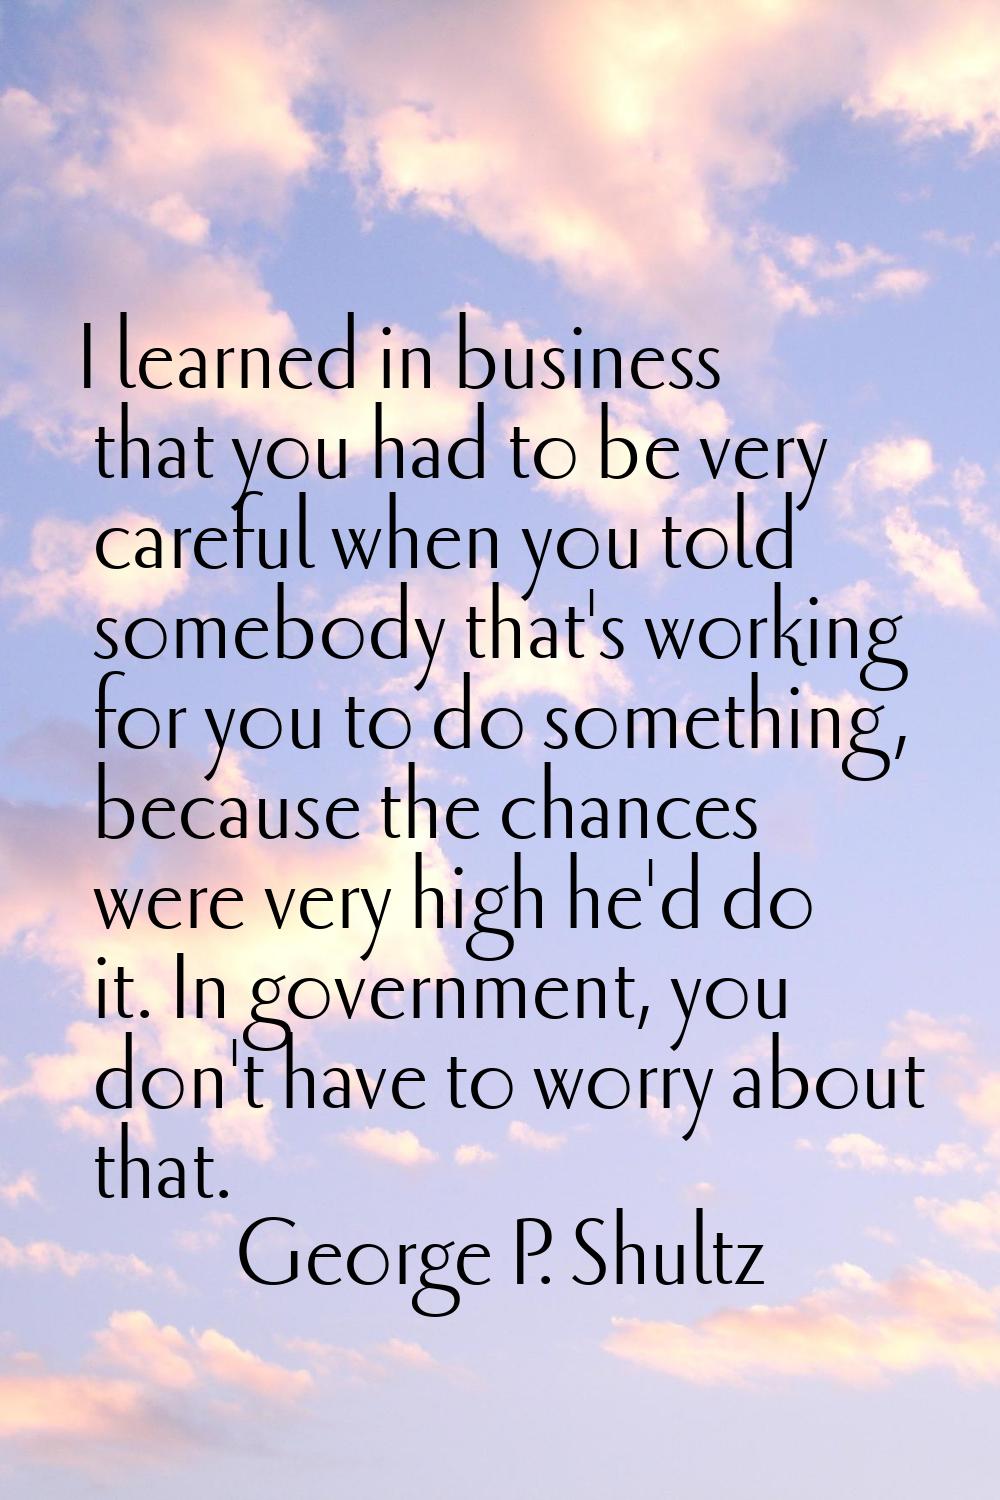 I learned in business that you had to be very careful when you told somebody that's working for you